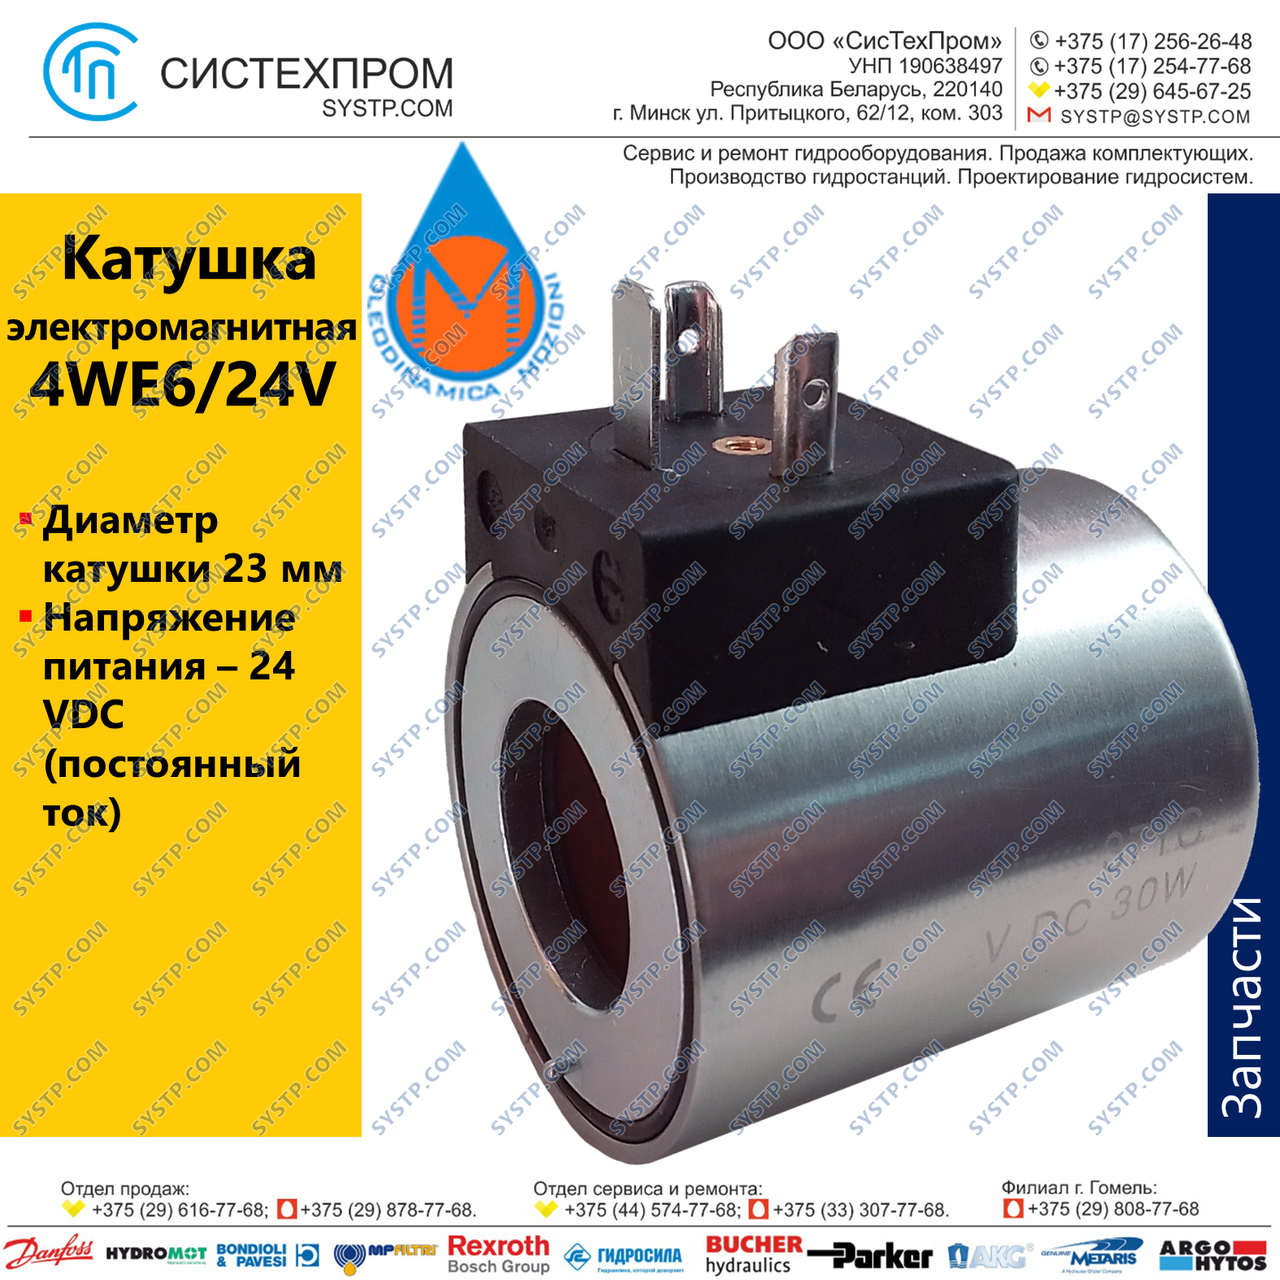 Катушка Coil with connector 4WE6/24V (арт. С4523G24)